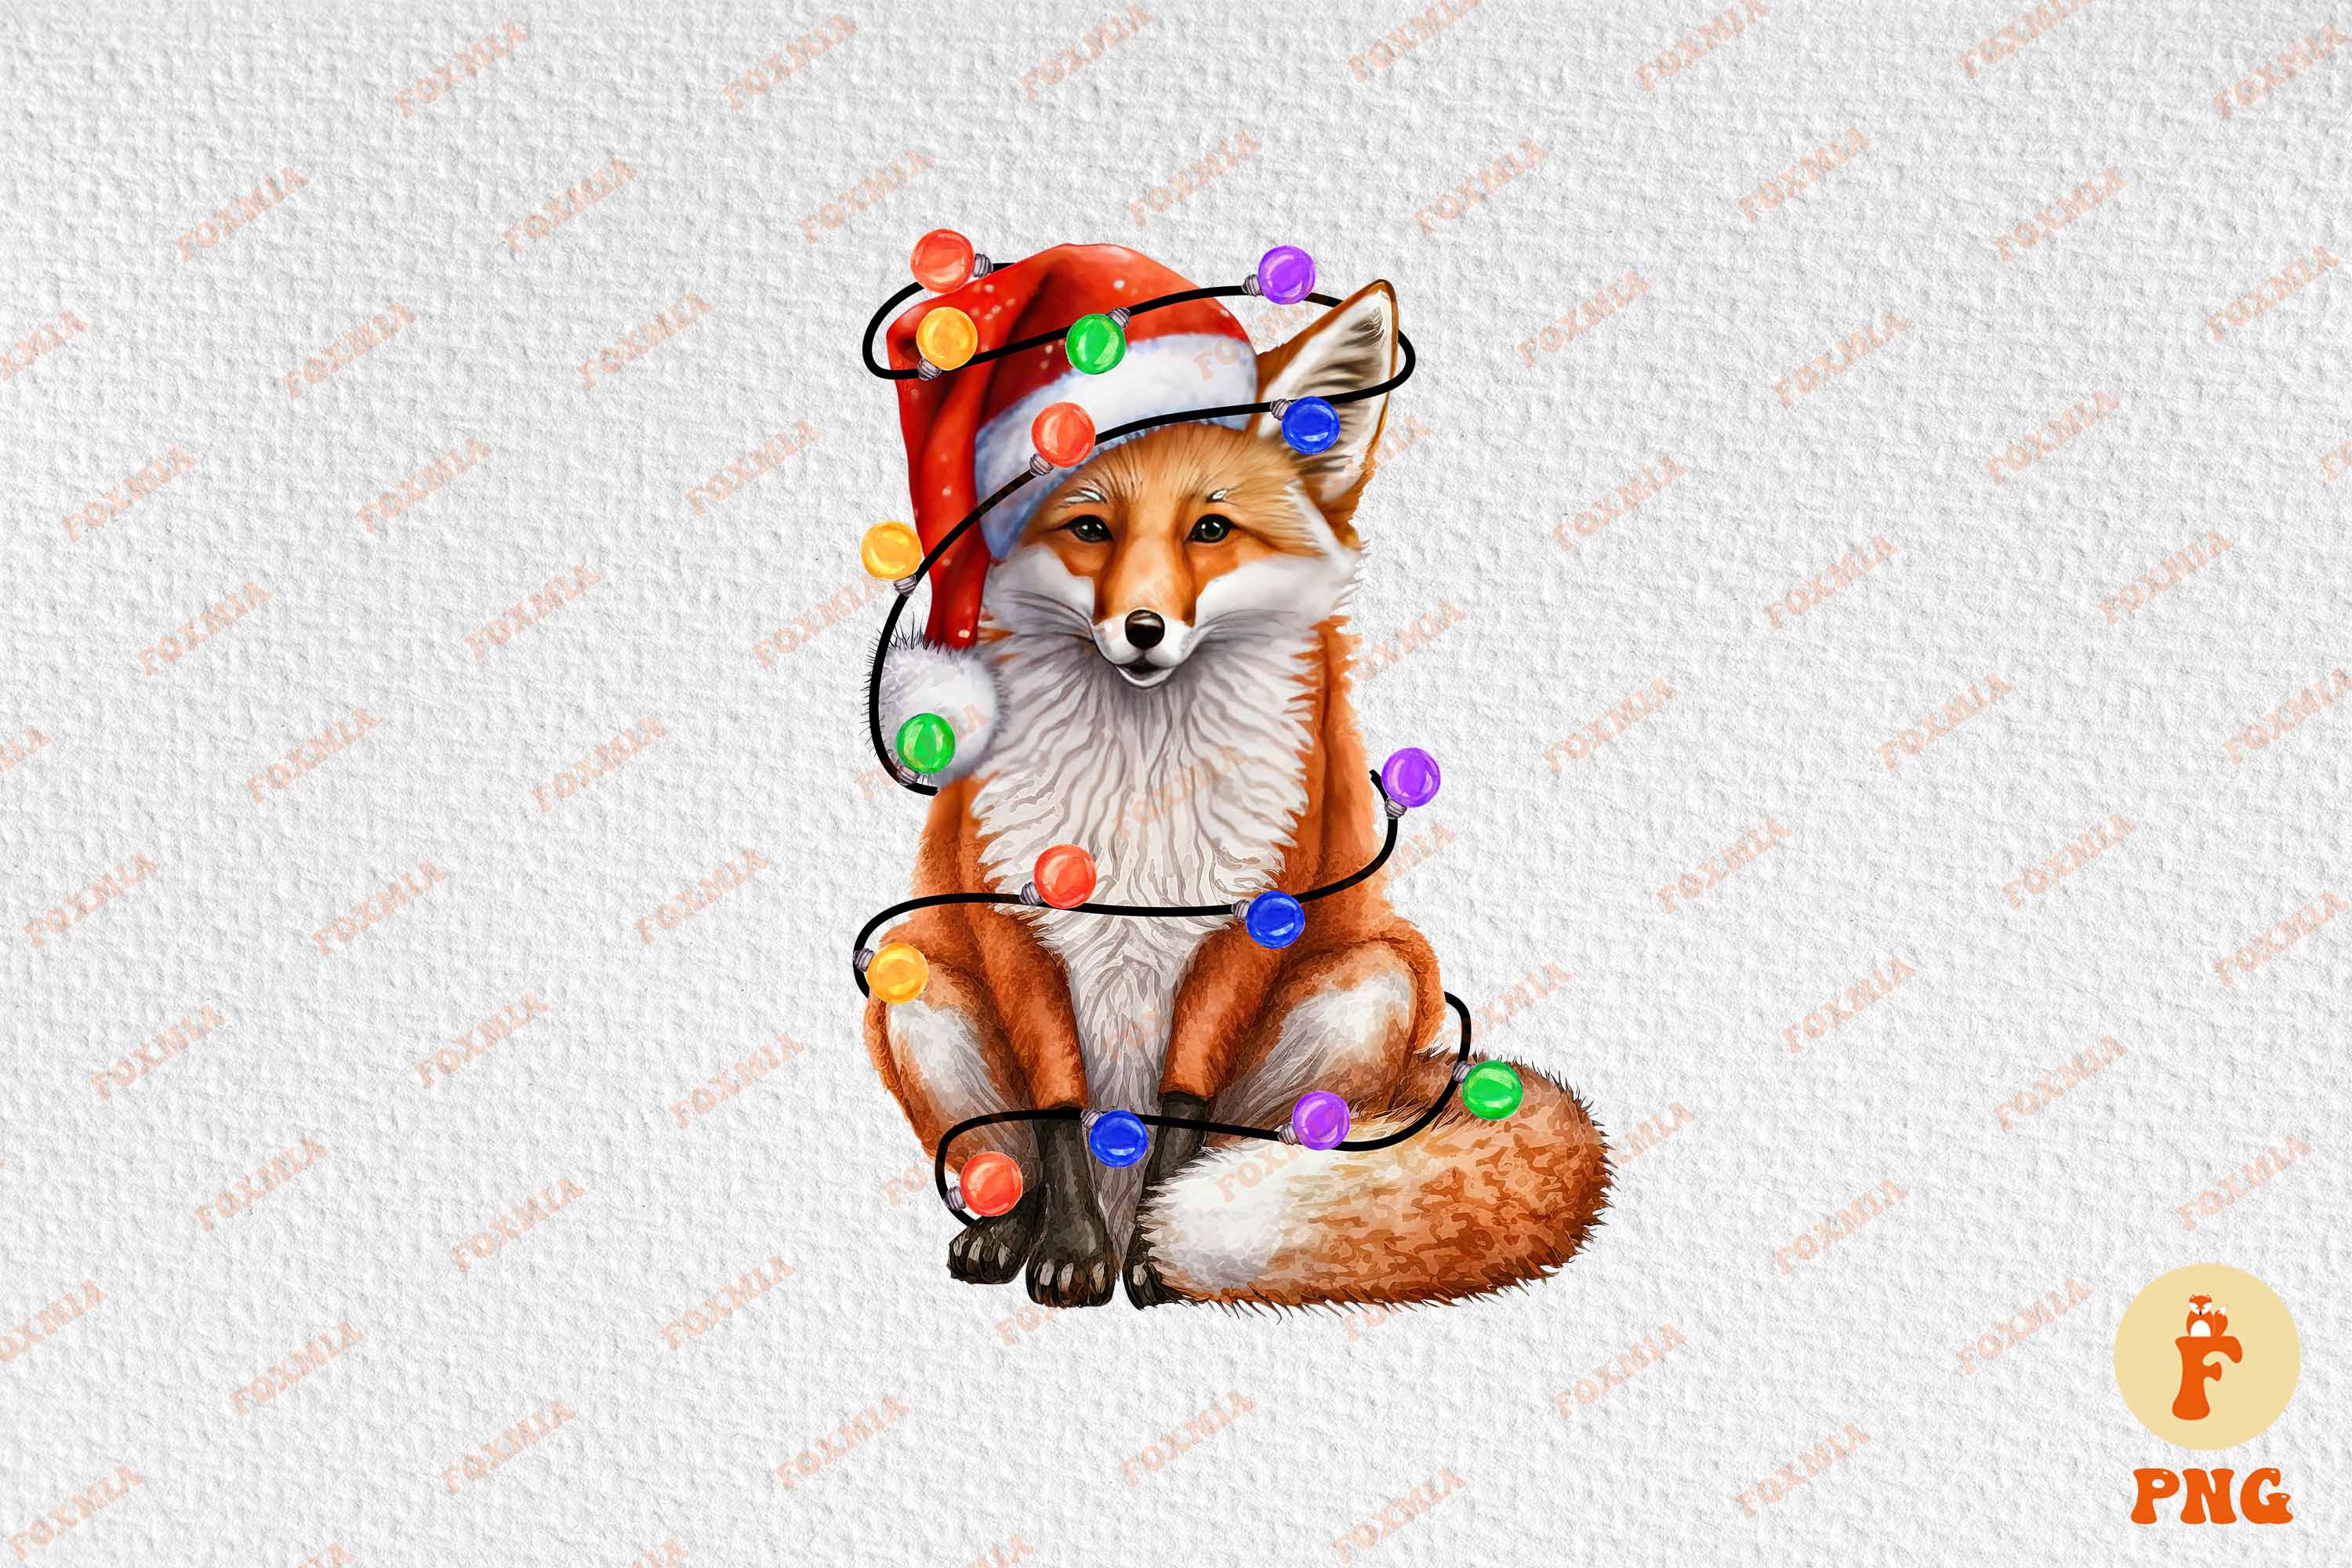 Exquisite image of a fox wearing a santa hat.